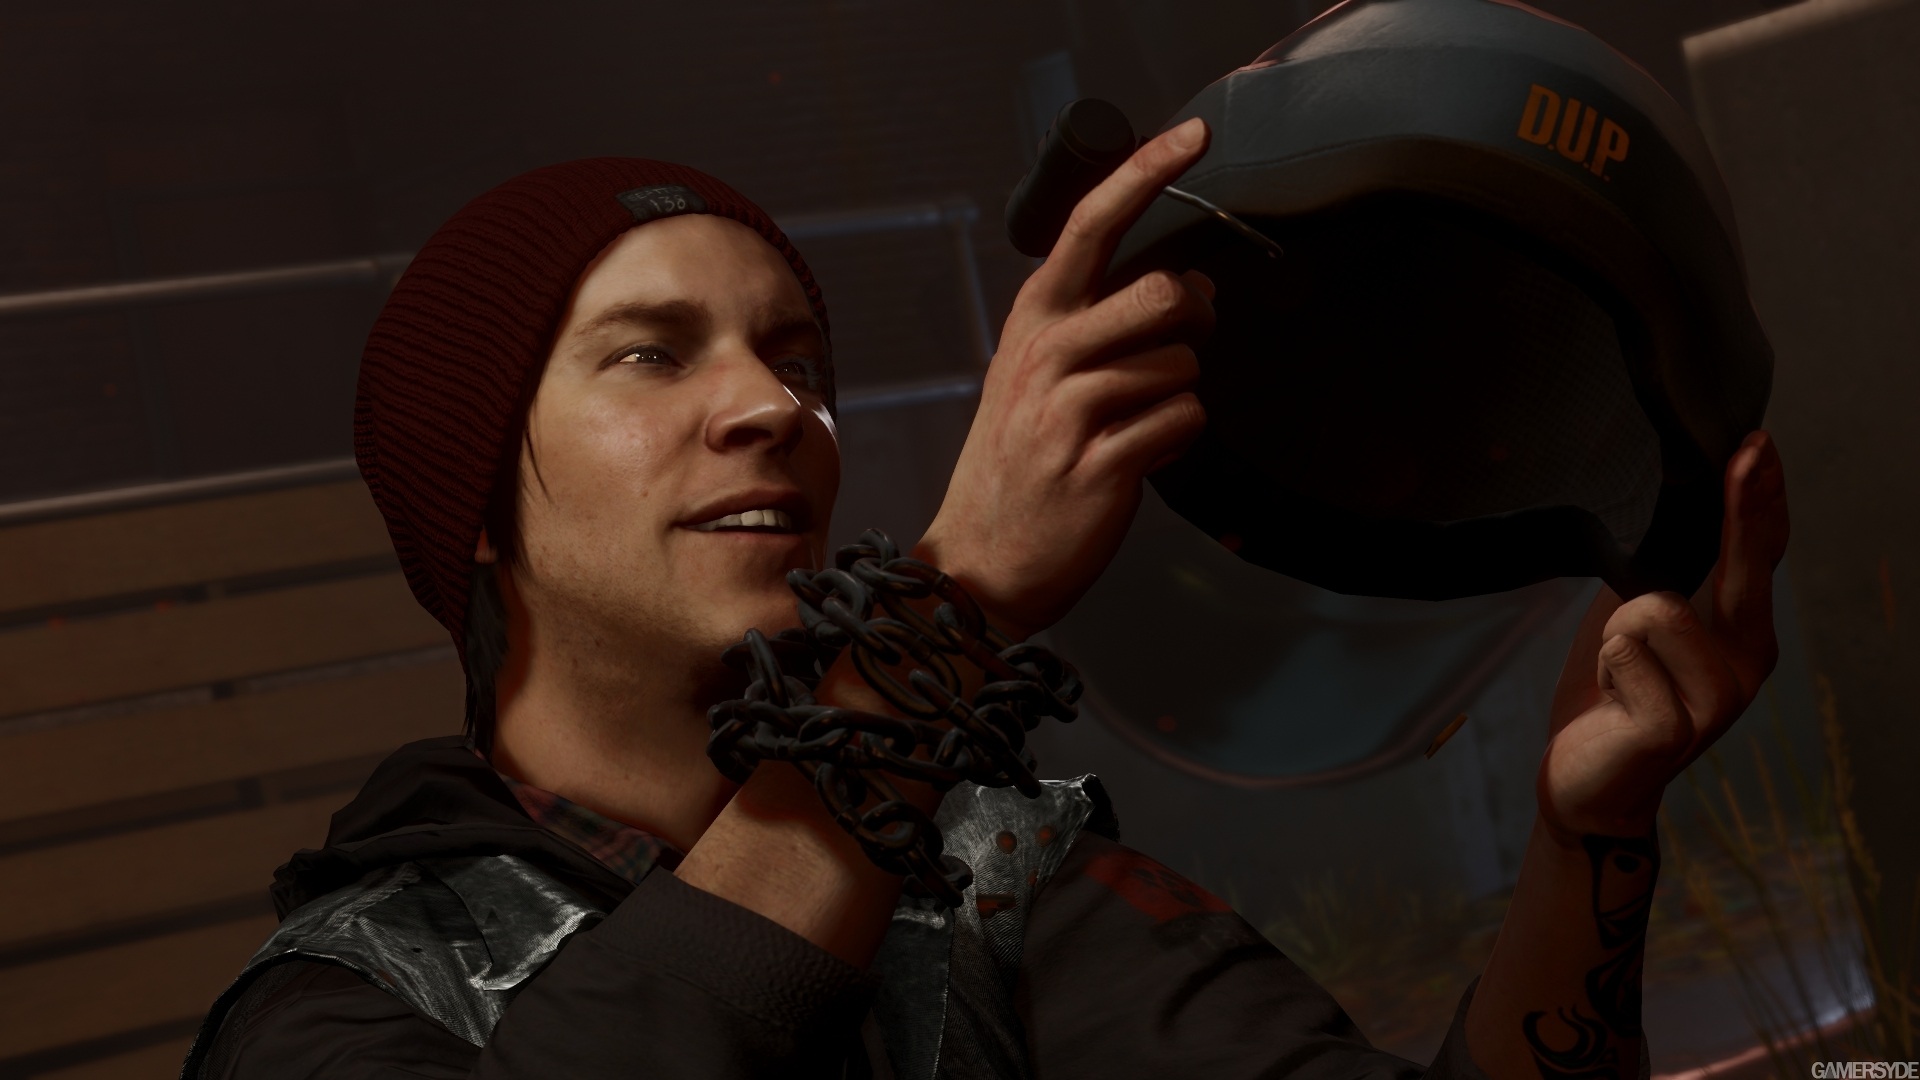 image_infamous_second_son-21482-2661_0004.jpg